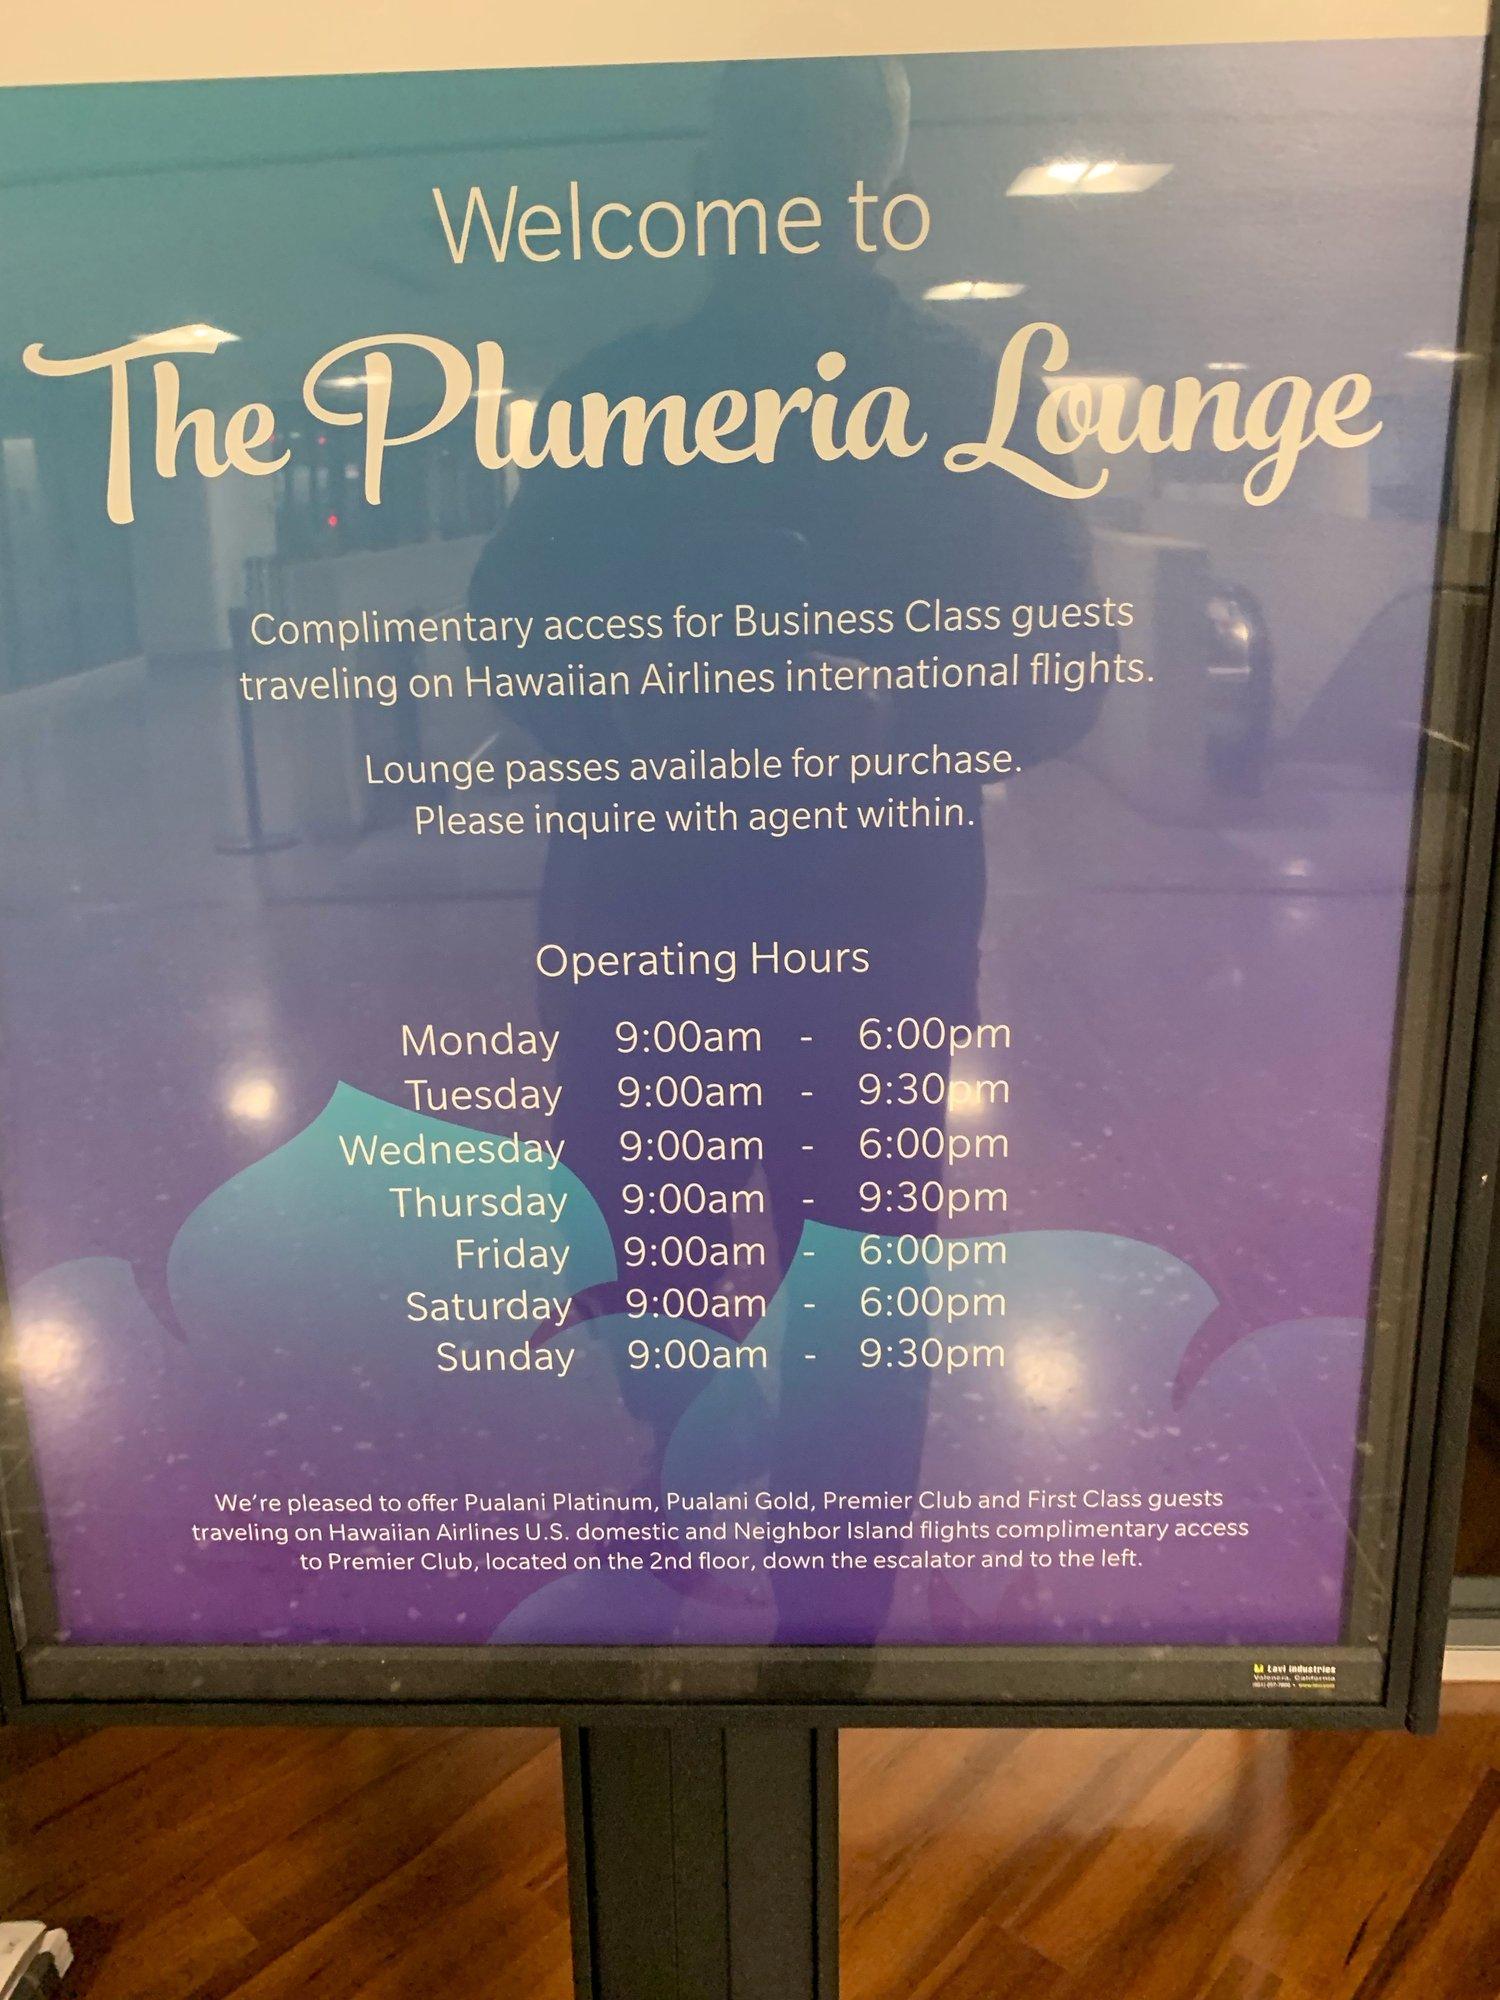 Hawaiian Airlines The Plumeria Lounge image 12 of 41